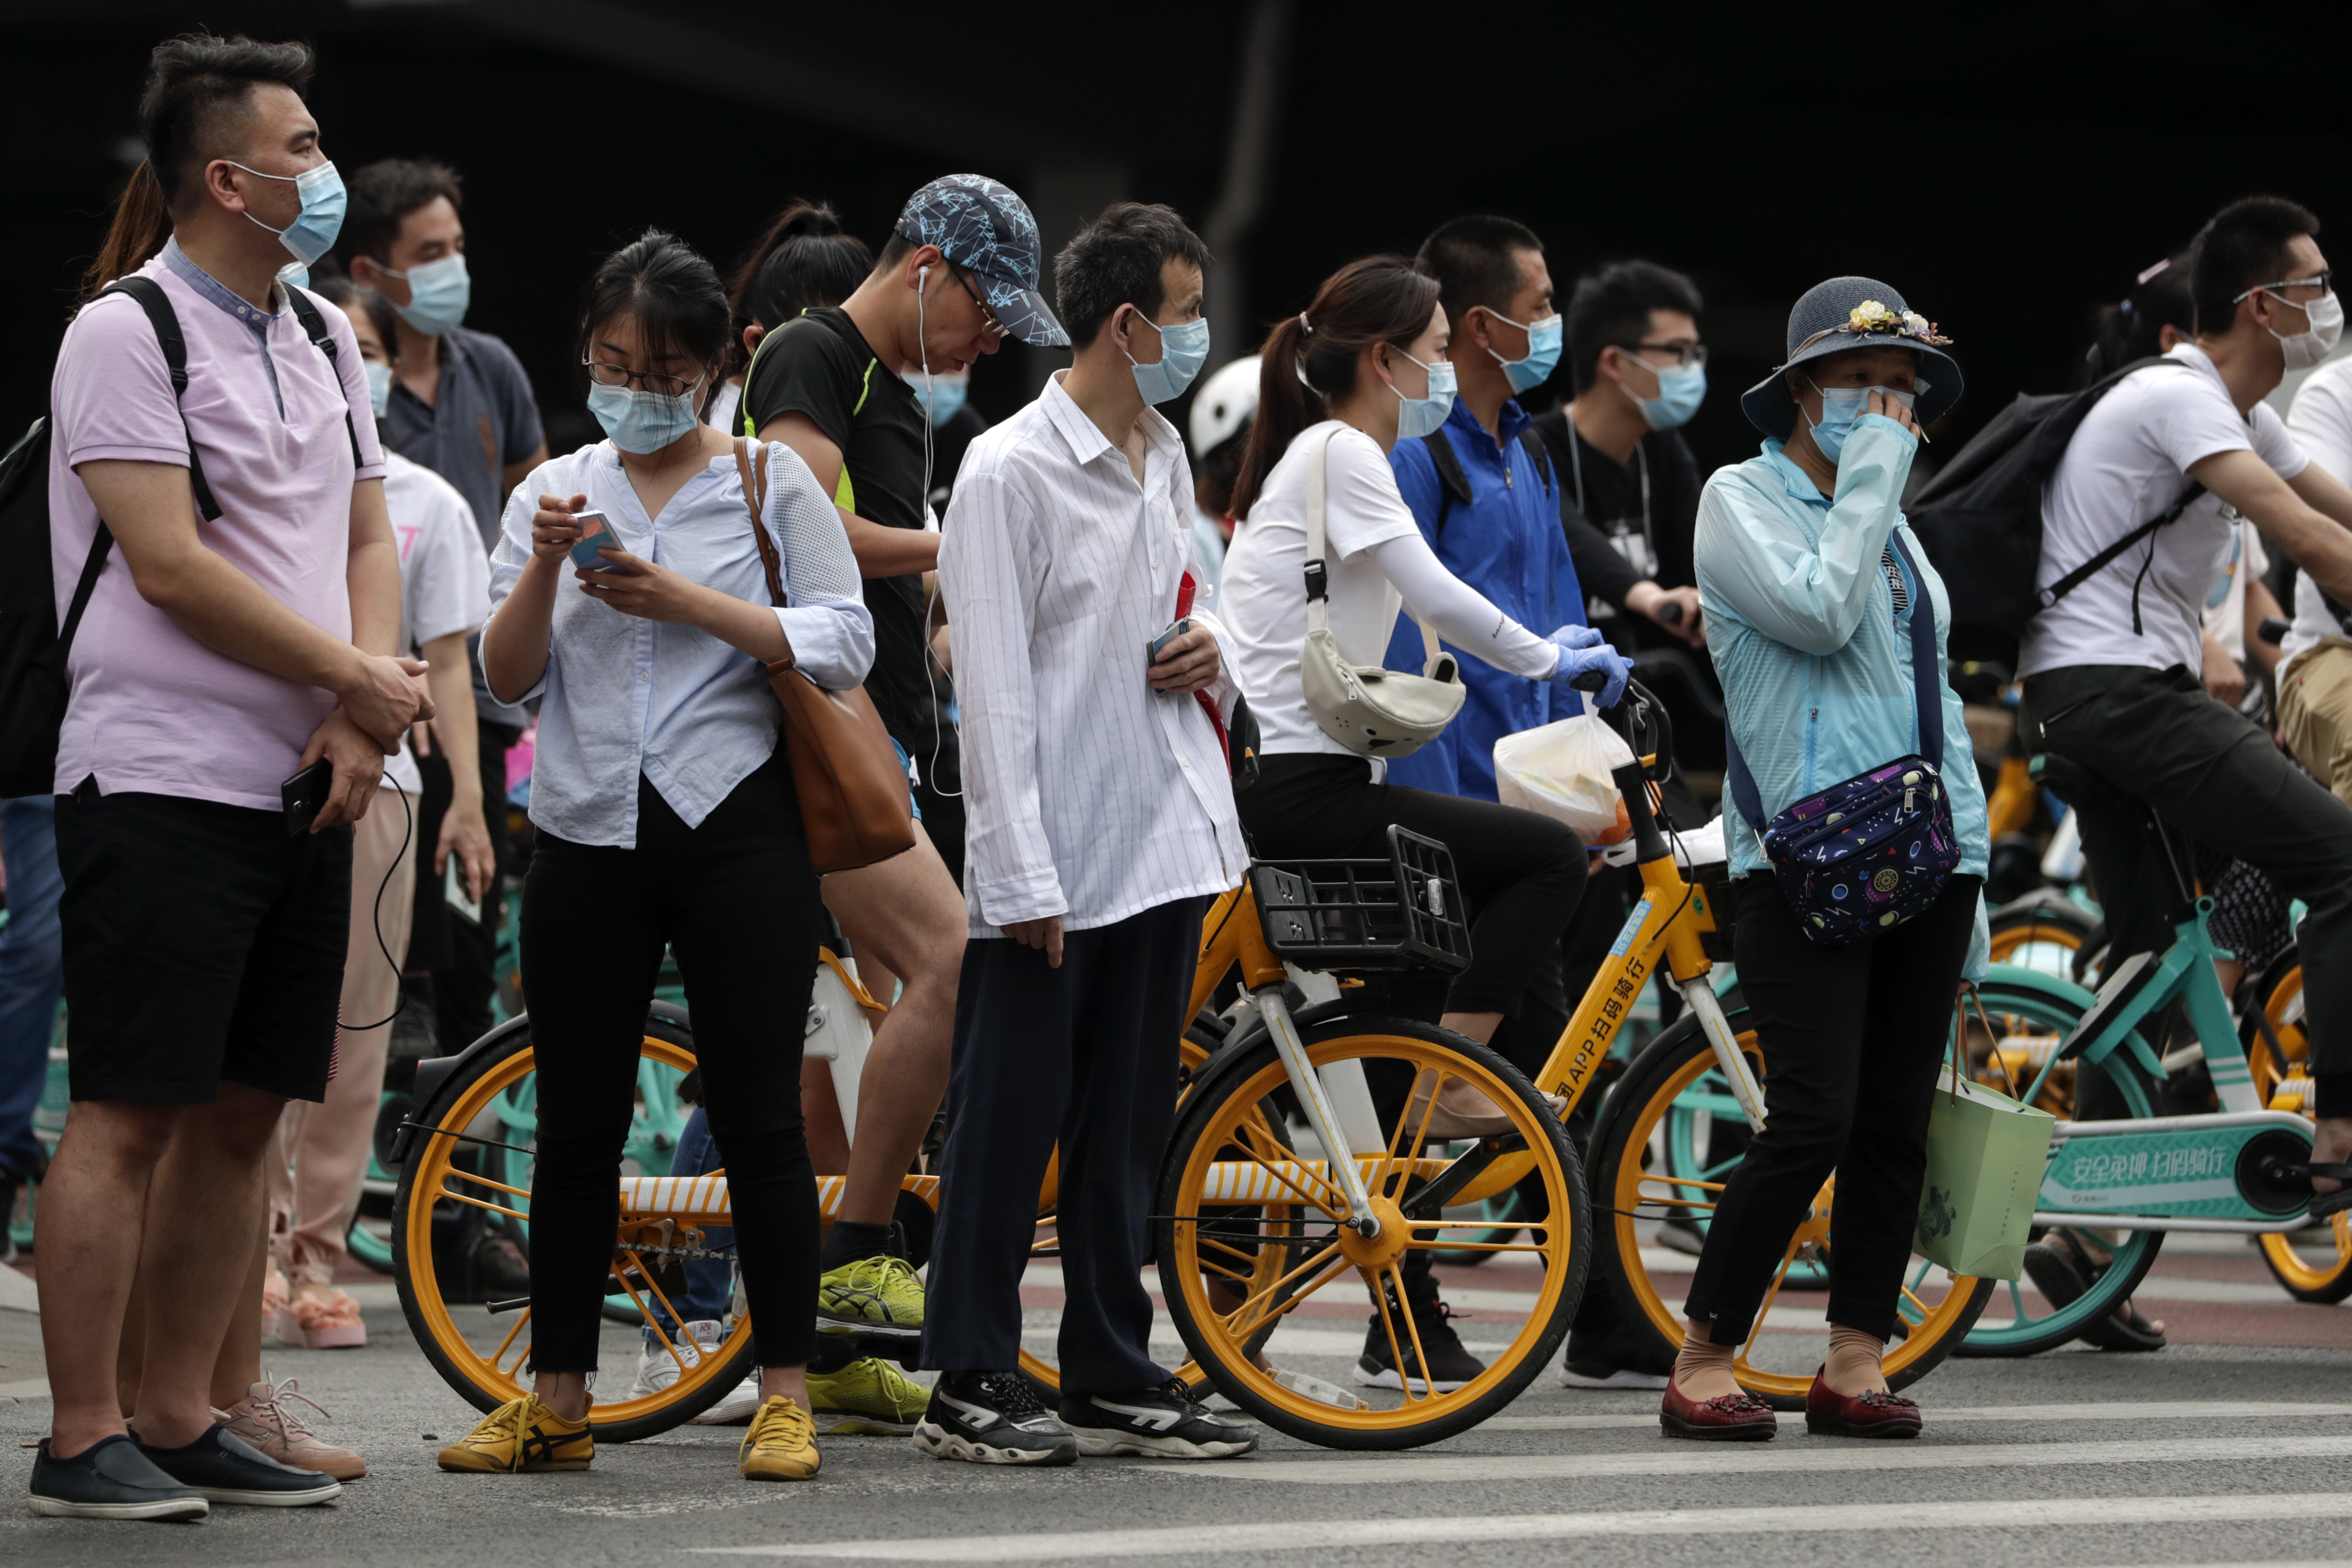 People wearing protective face masks to help curb the spread of the new coronavirus wait to cross a street in Beijing, Monday, June 22, 2020. A Beijing government spokesperson said the city has contained the momentum of a recent coronavirus outbreak that has infected a few hundreds of people, after the number of daily new cases fell to single digits. Photo: AP